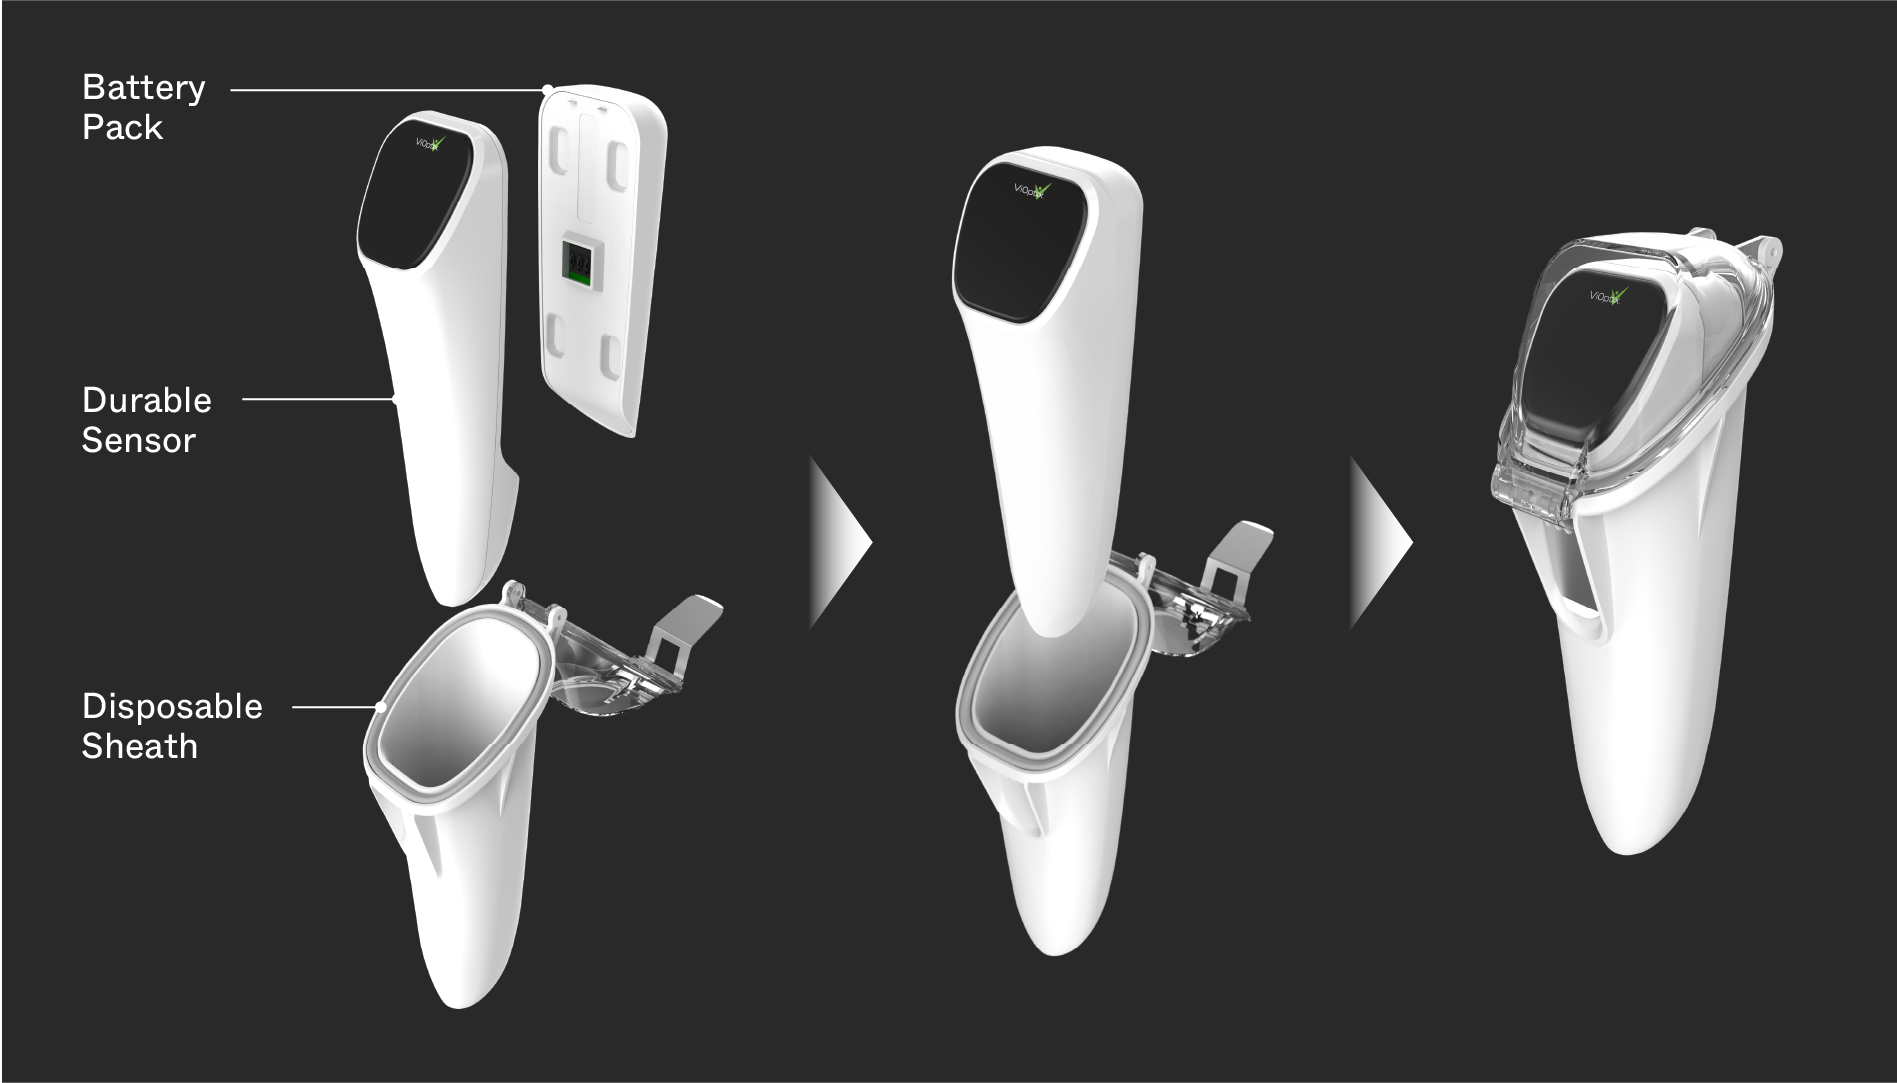 Exploded view of the ViOptix Intra.Ox handheld tissue oxygenation monitor with read out on the screen, showing components: battery pack, durable sensor, and disposable sheath.